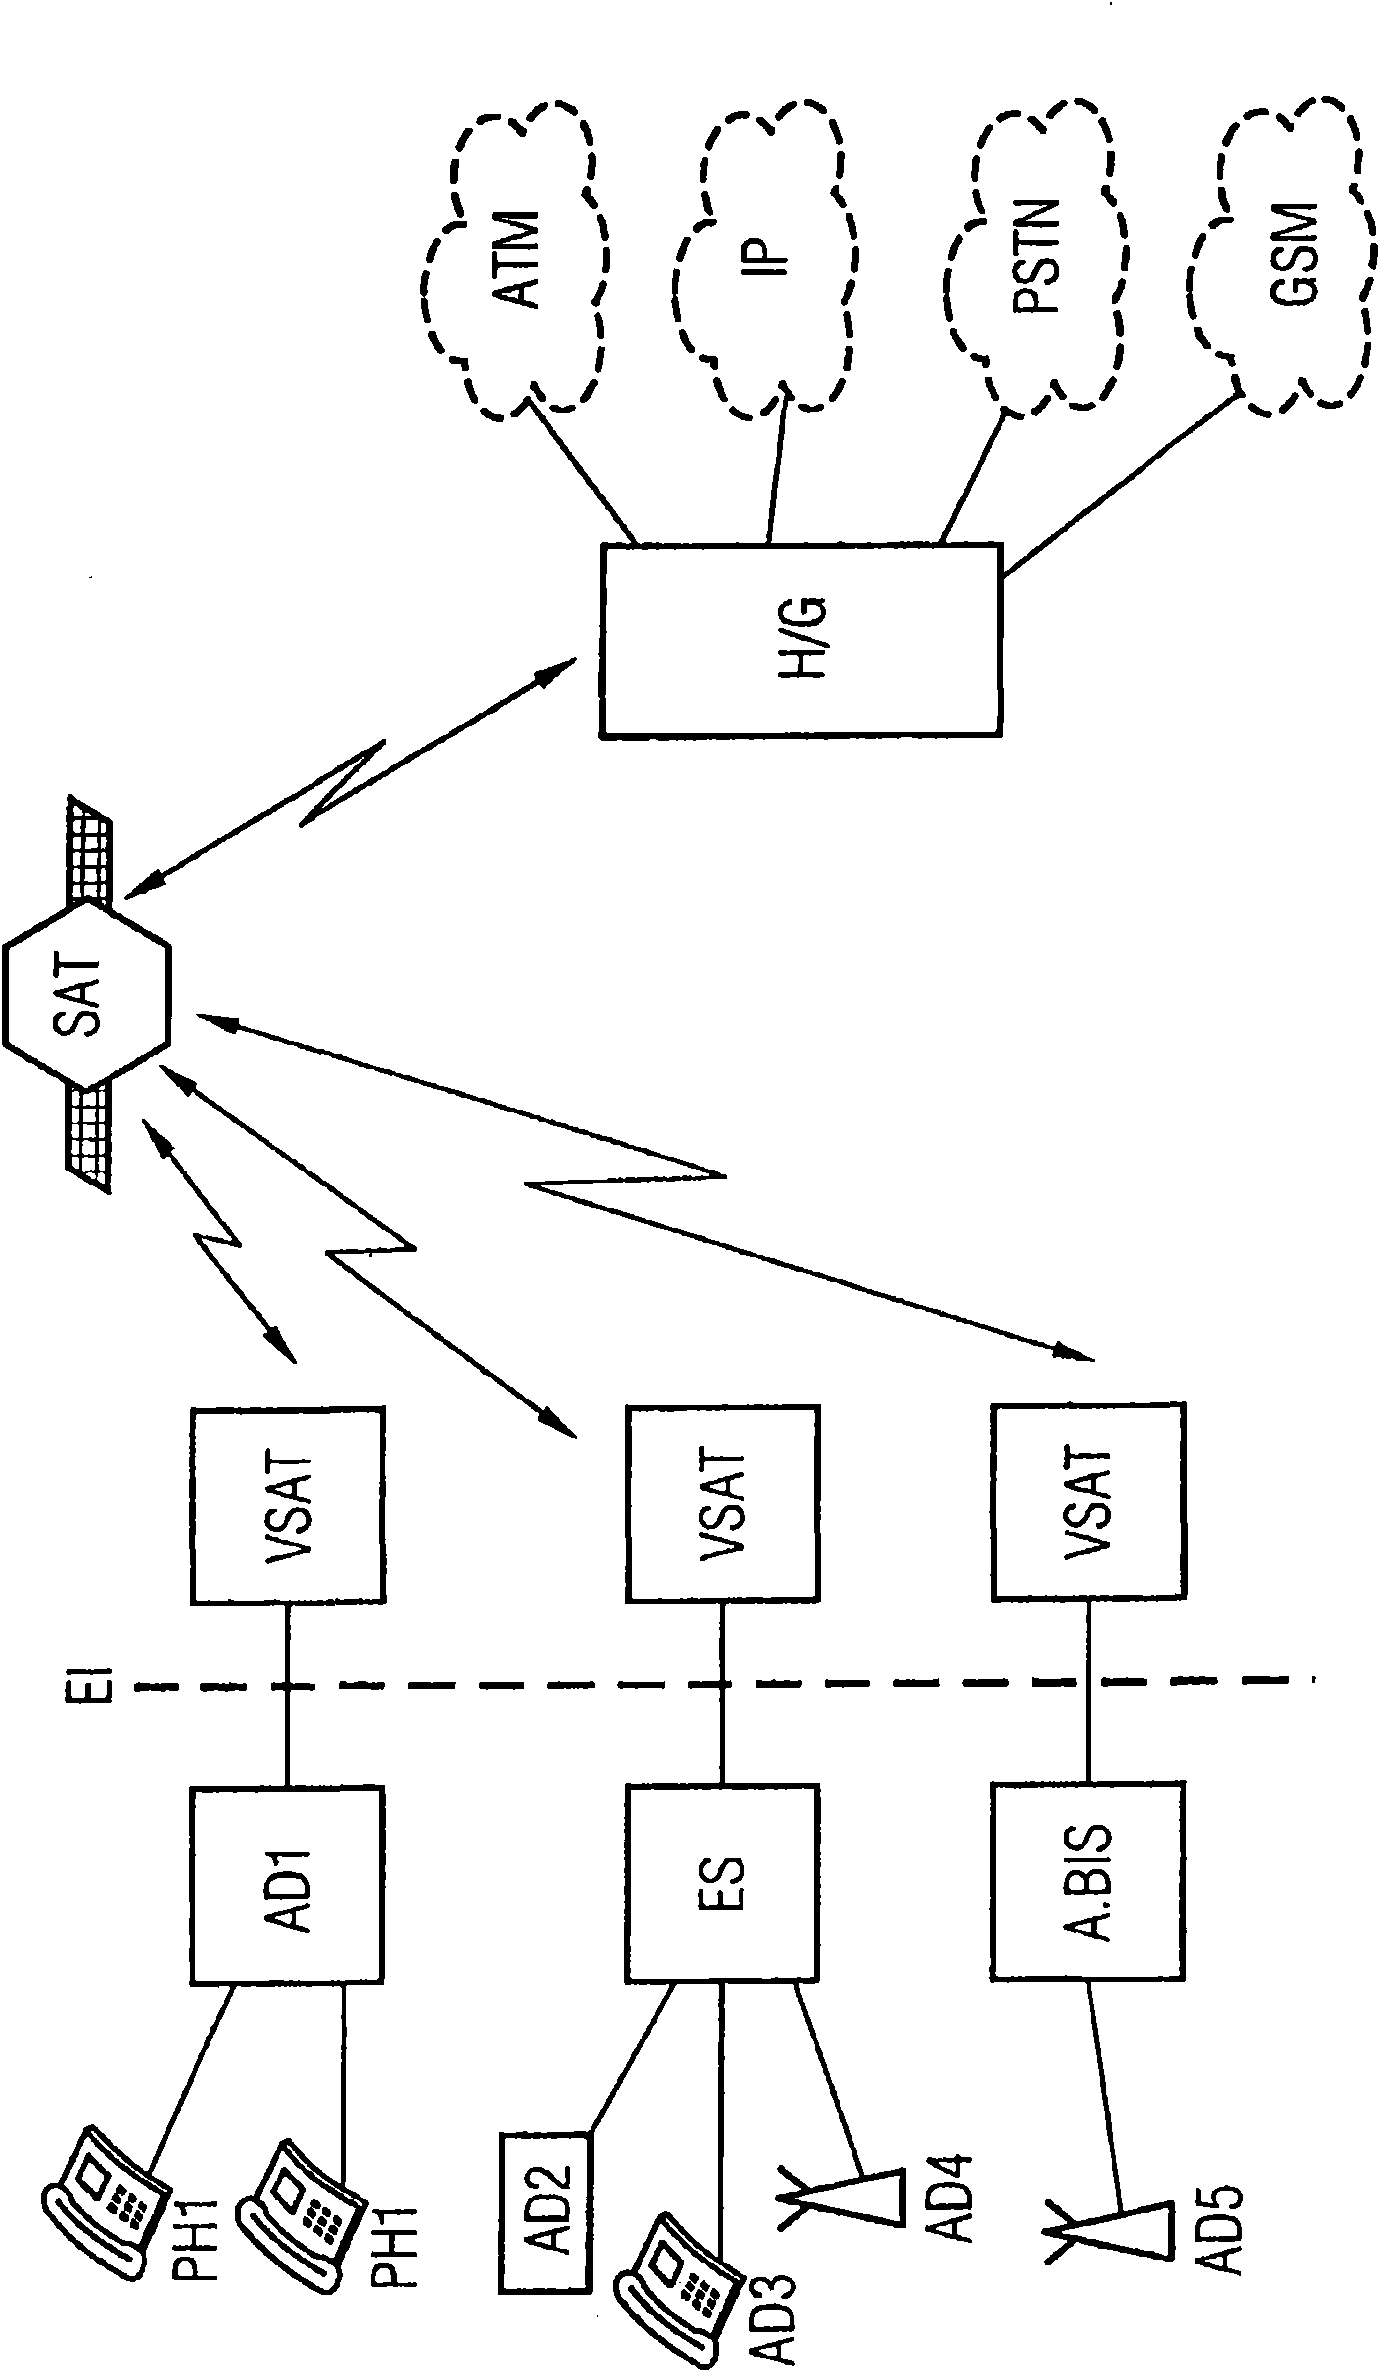 Method and systems for allocating bandwidth